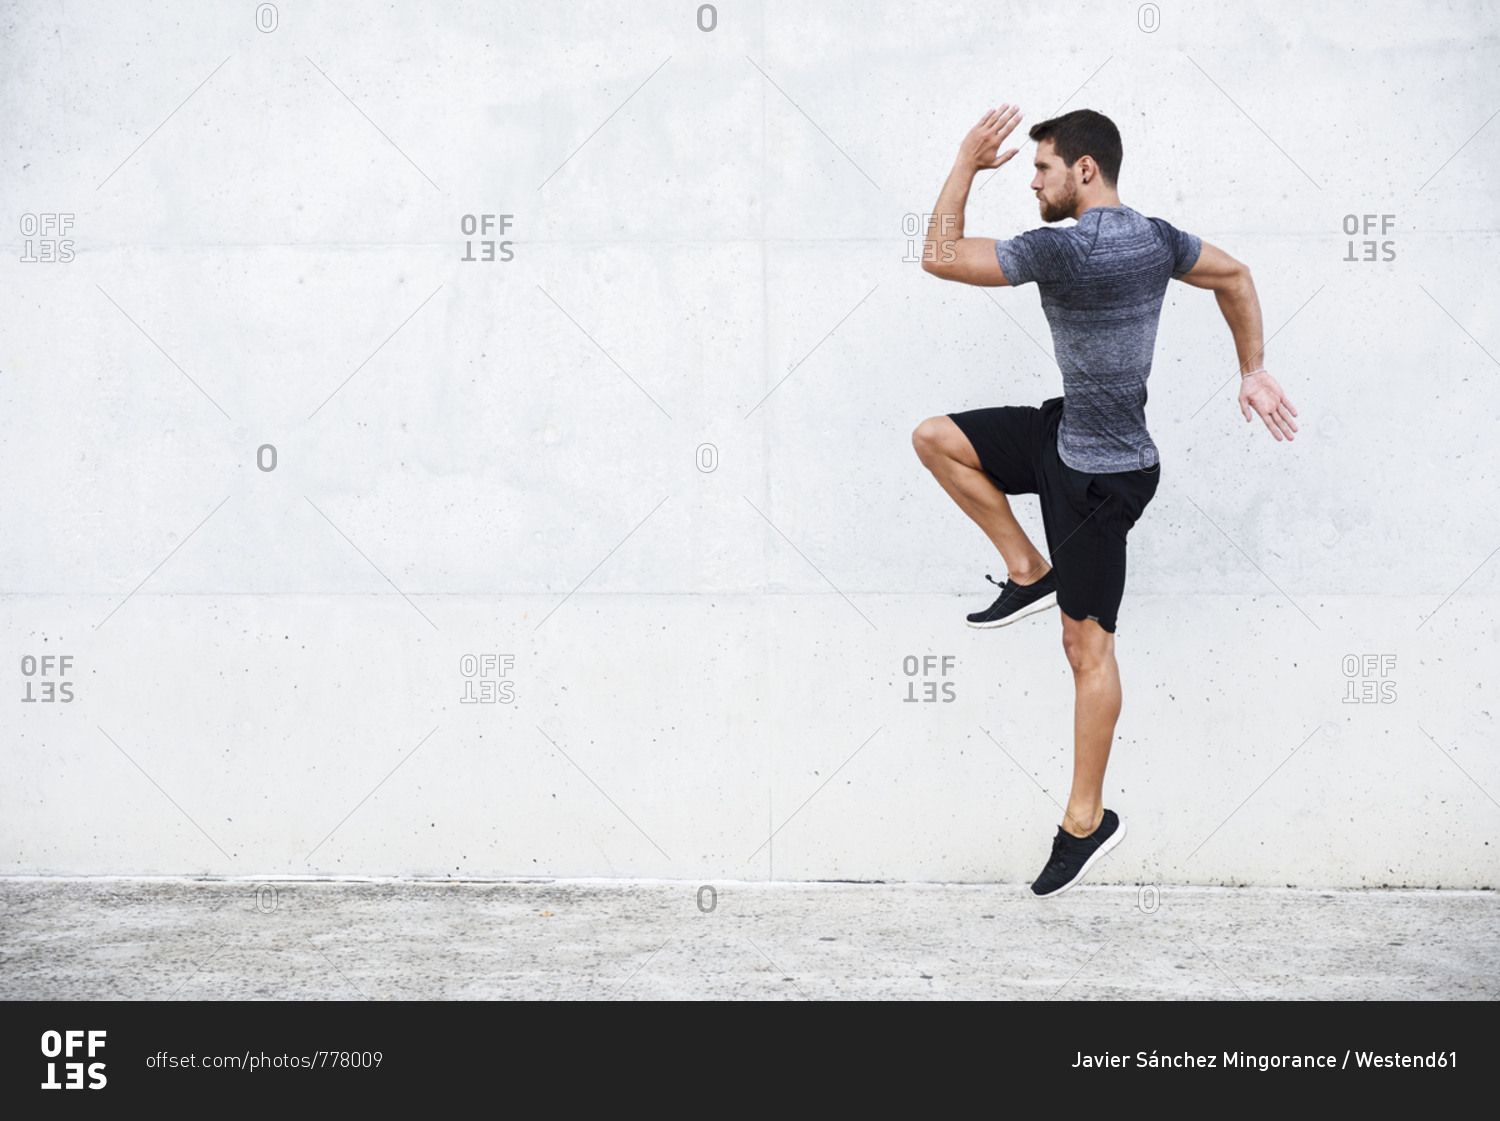 Athlete jumping in front of white wall